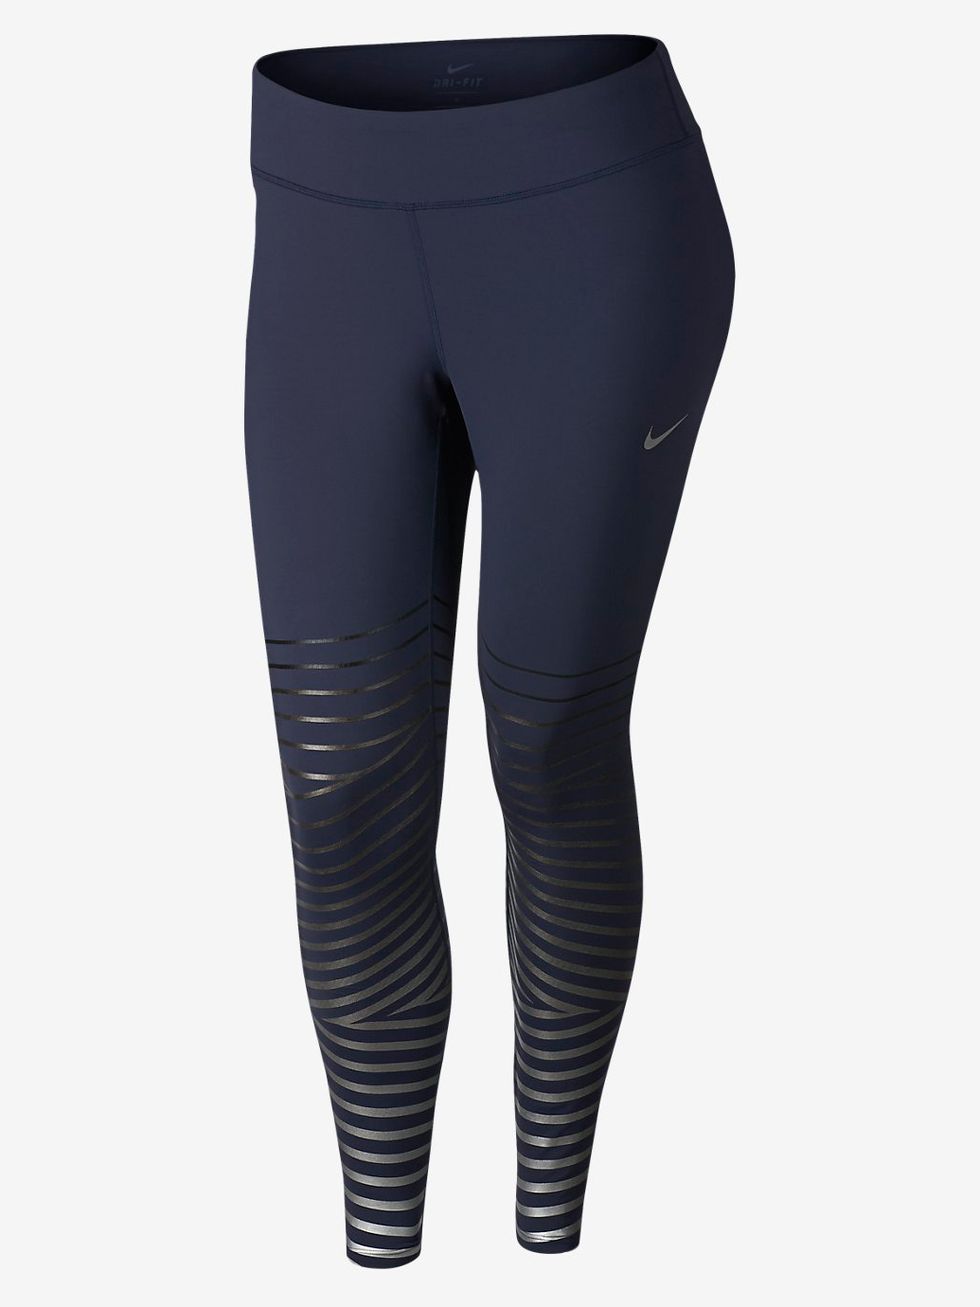 Nike Women's Epic Lux Tight Crop Running Pants (Navy, X-Small) 